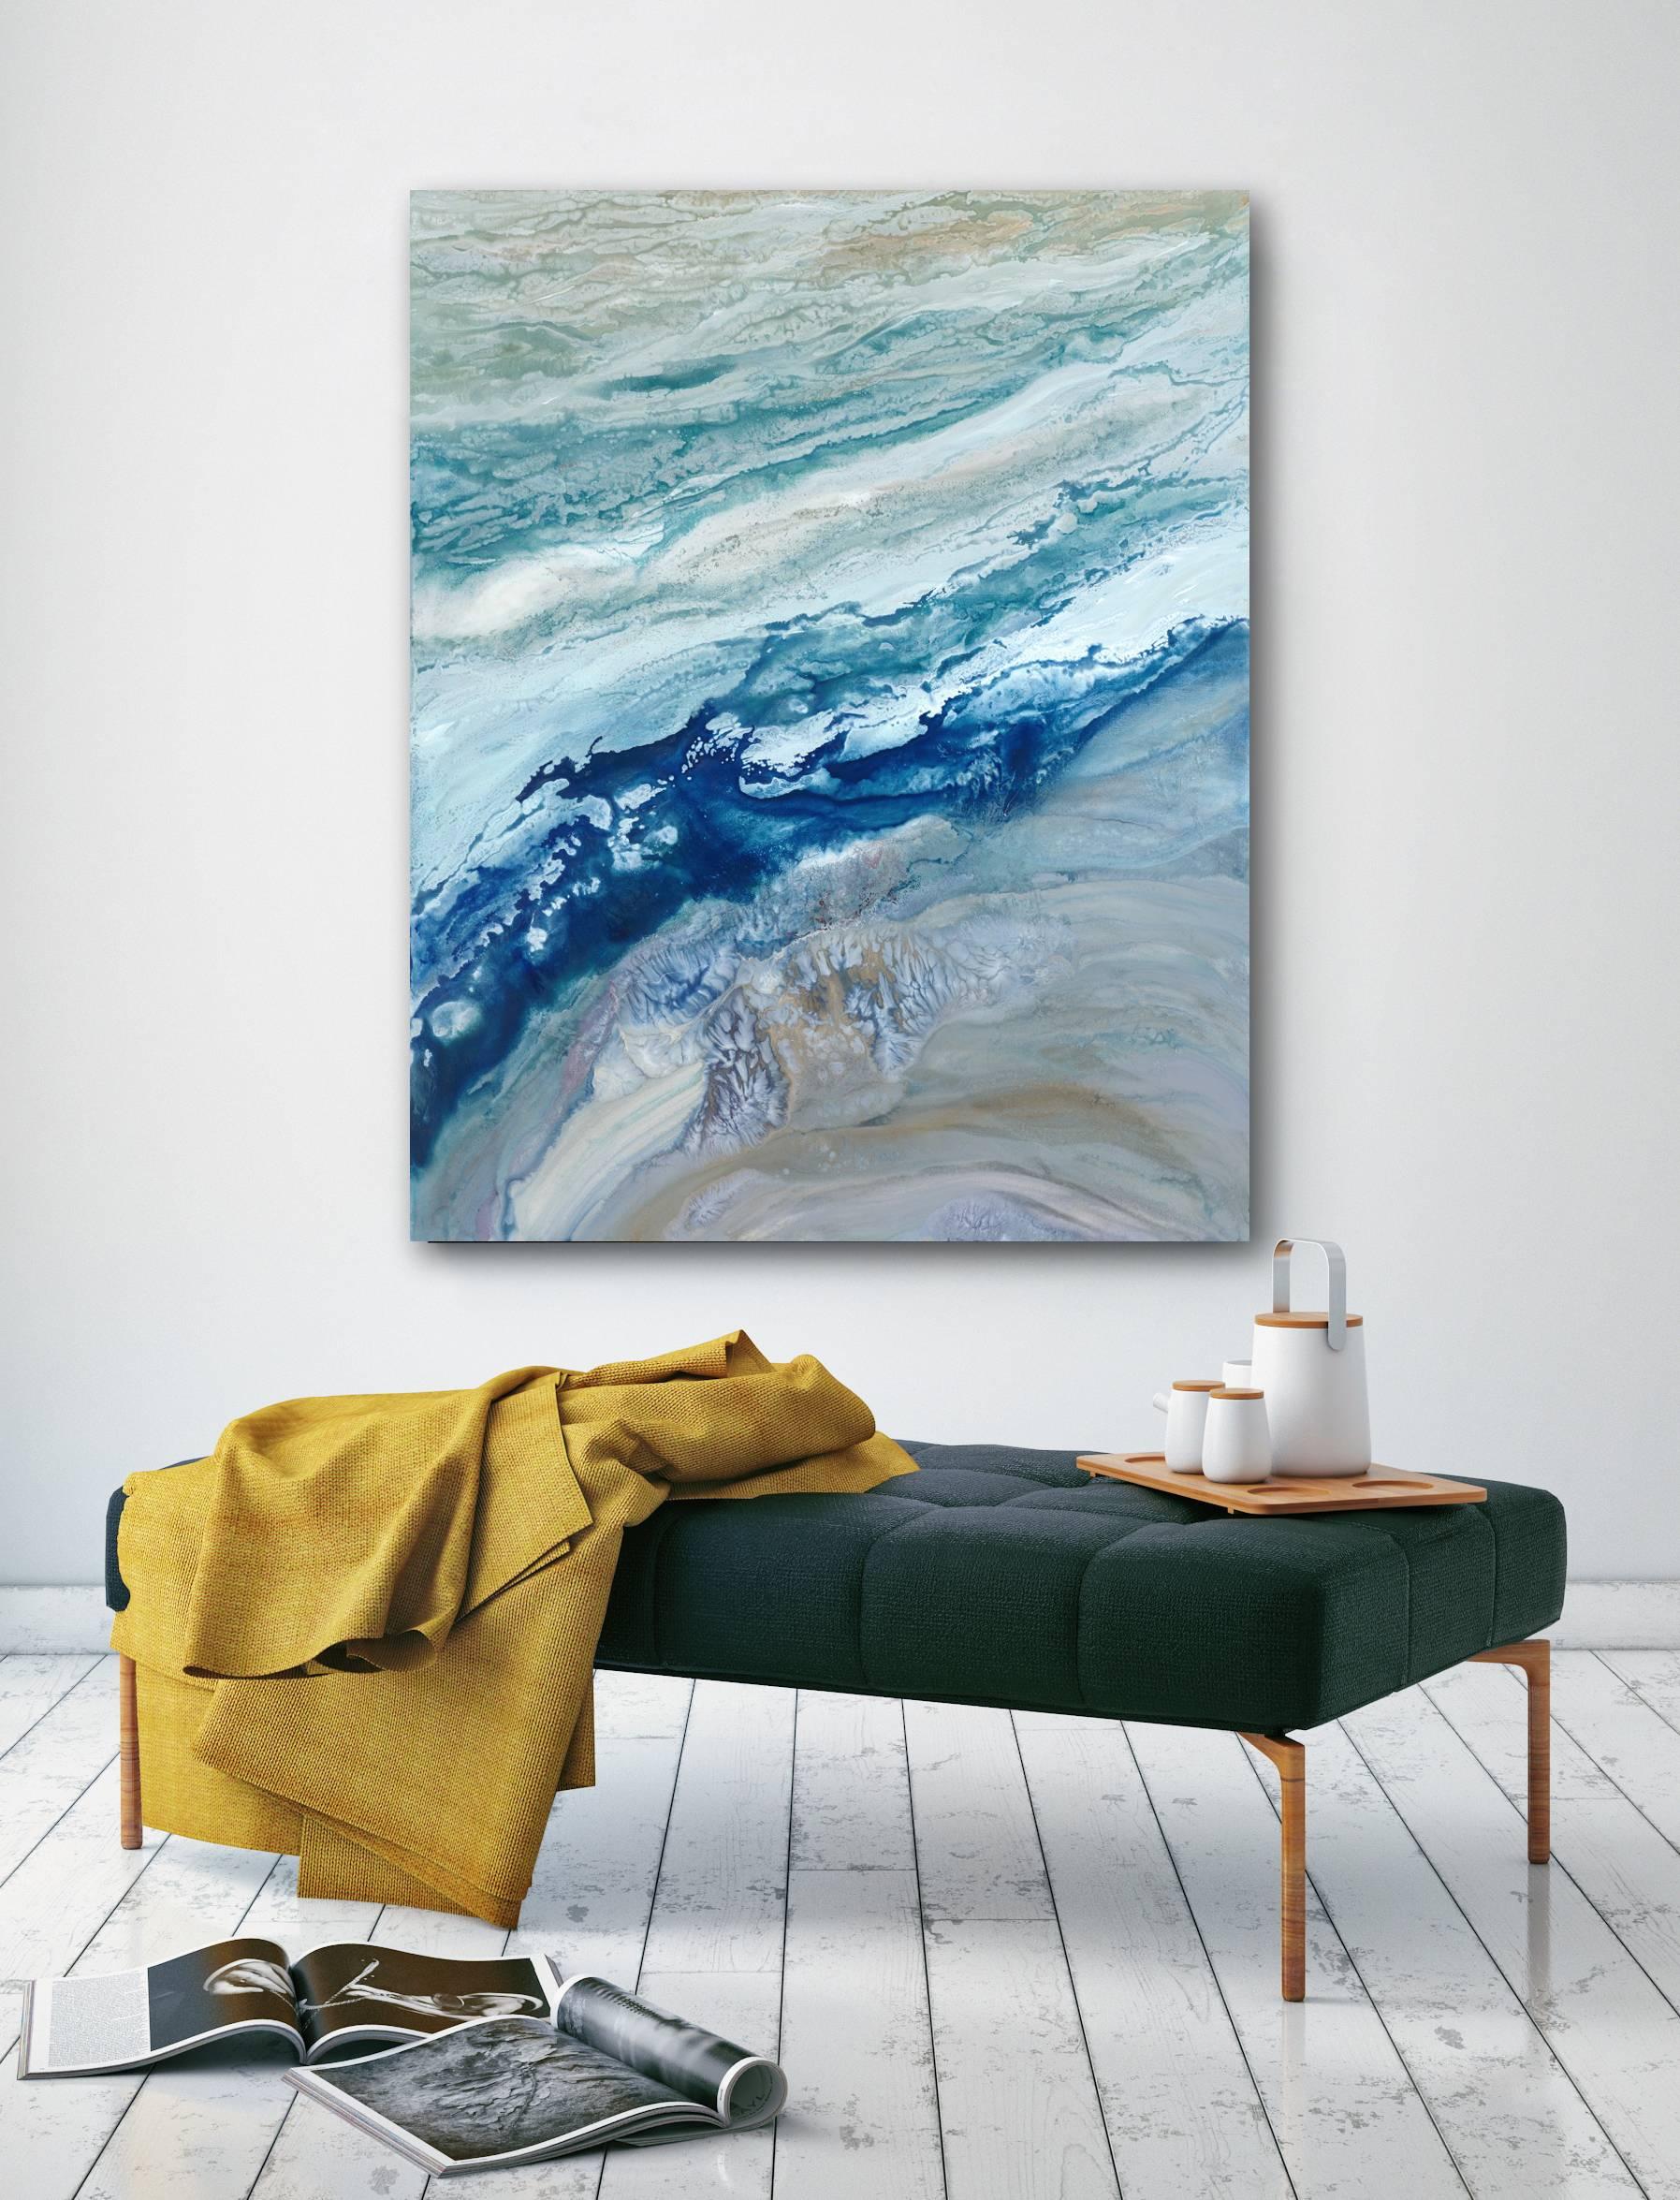 Abstract, coastal, water, waves, blue, green, teal, turquoise, white, soft, Pat Steir

ABOUT TEODORA GUERERRA

BIOGRAPHY
Teodora Guererra received her Bachelor of Arts in Art Education with a minor in Studio Art from Southern Connecticut University